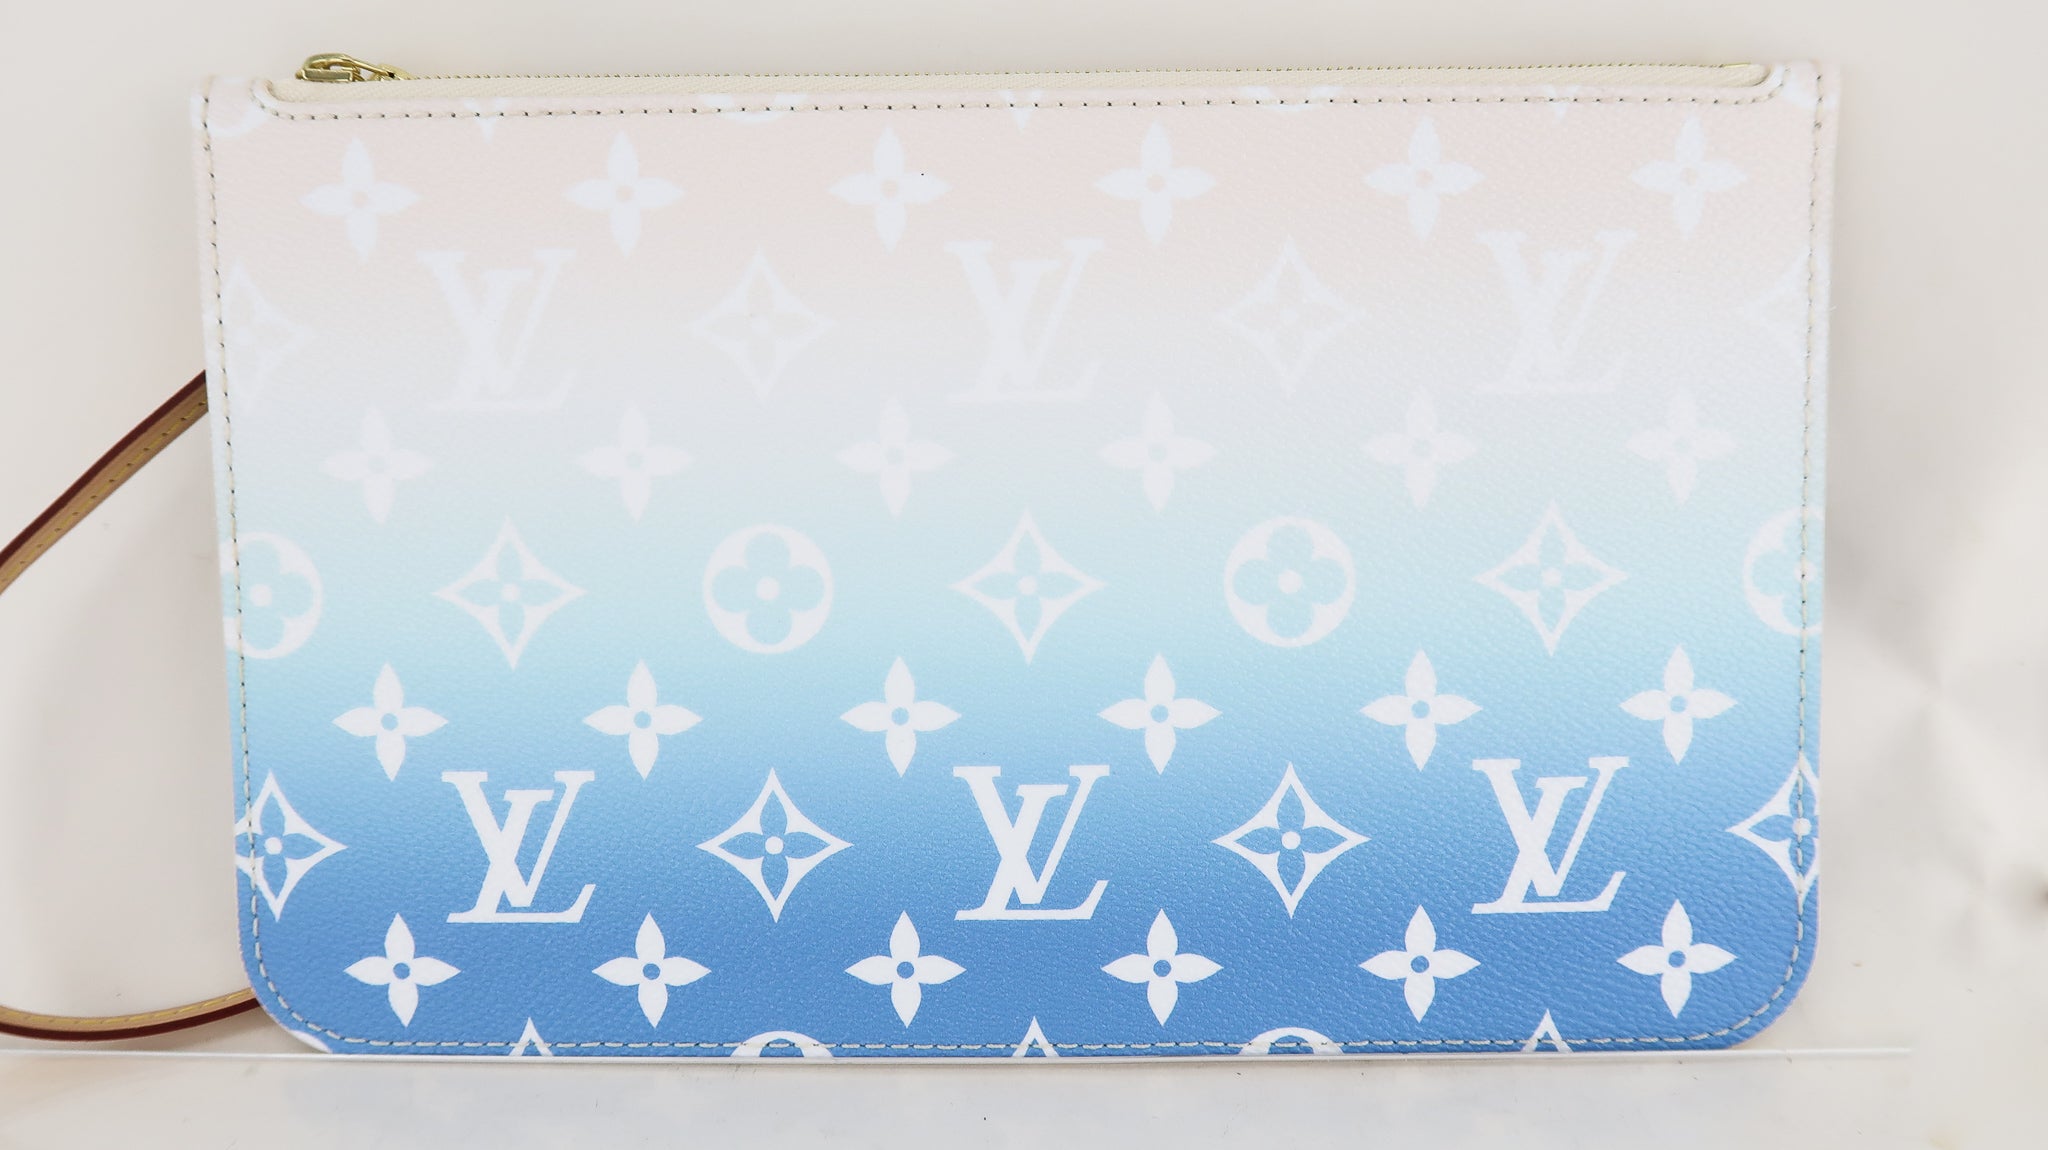 LOUIS VUITTON Monogram By The Pool Neverfull MM Pochette Blue 1260226